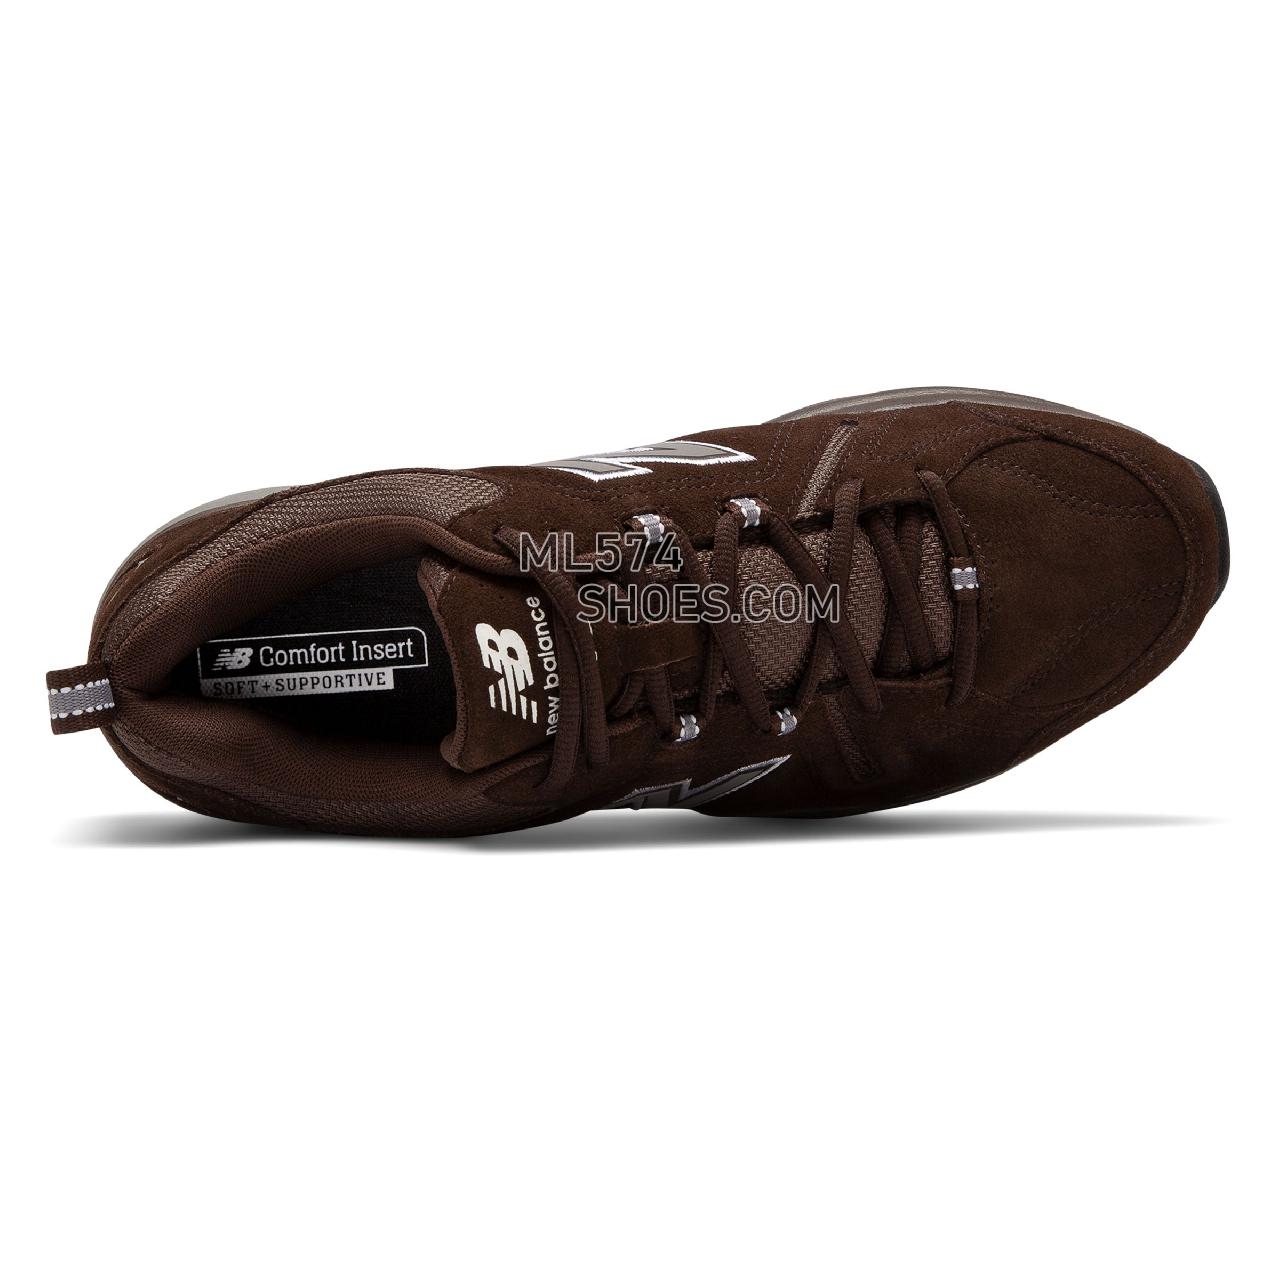 New Balance 608v5 - Men's Everyday Trainers - Chocolate Brown with White - MX608UB5